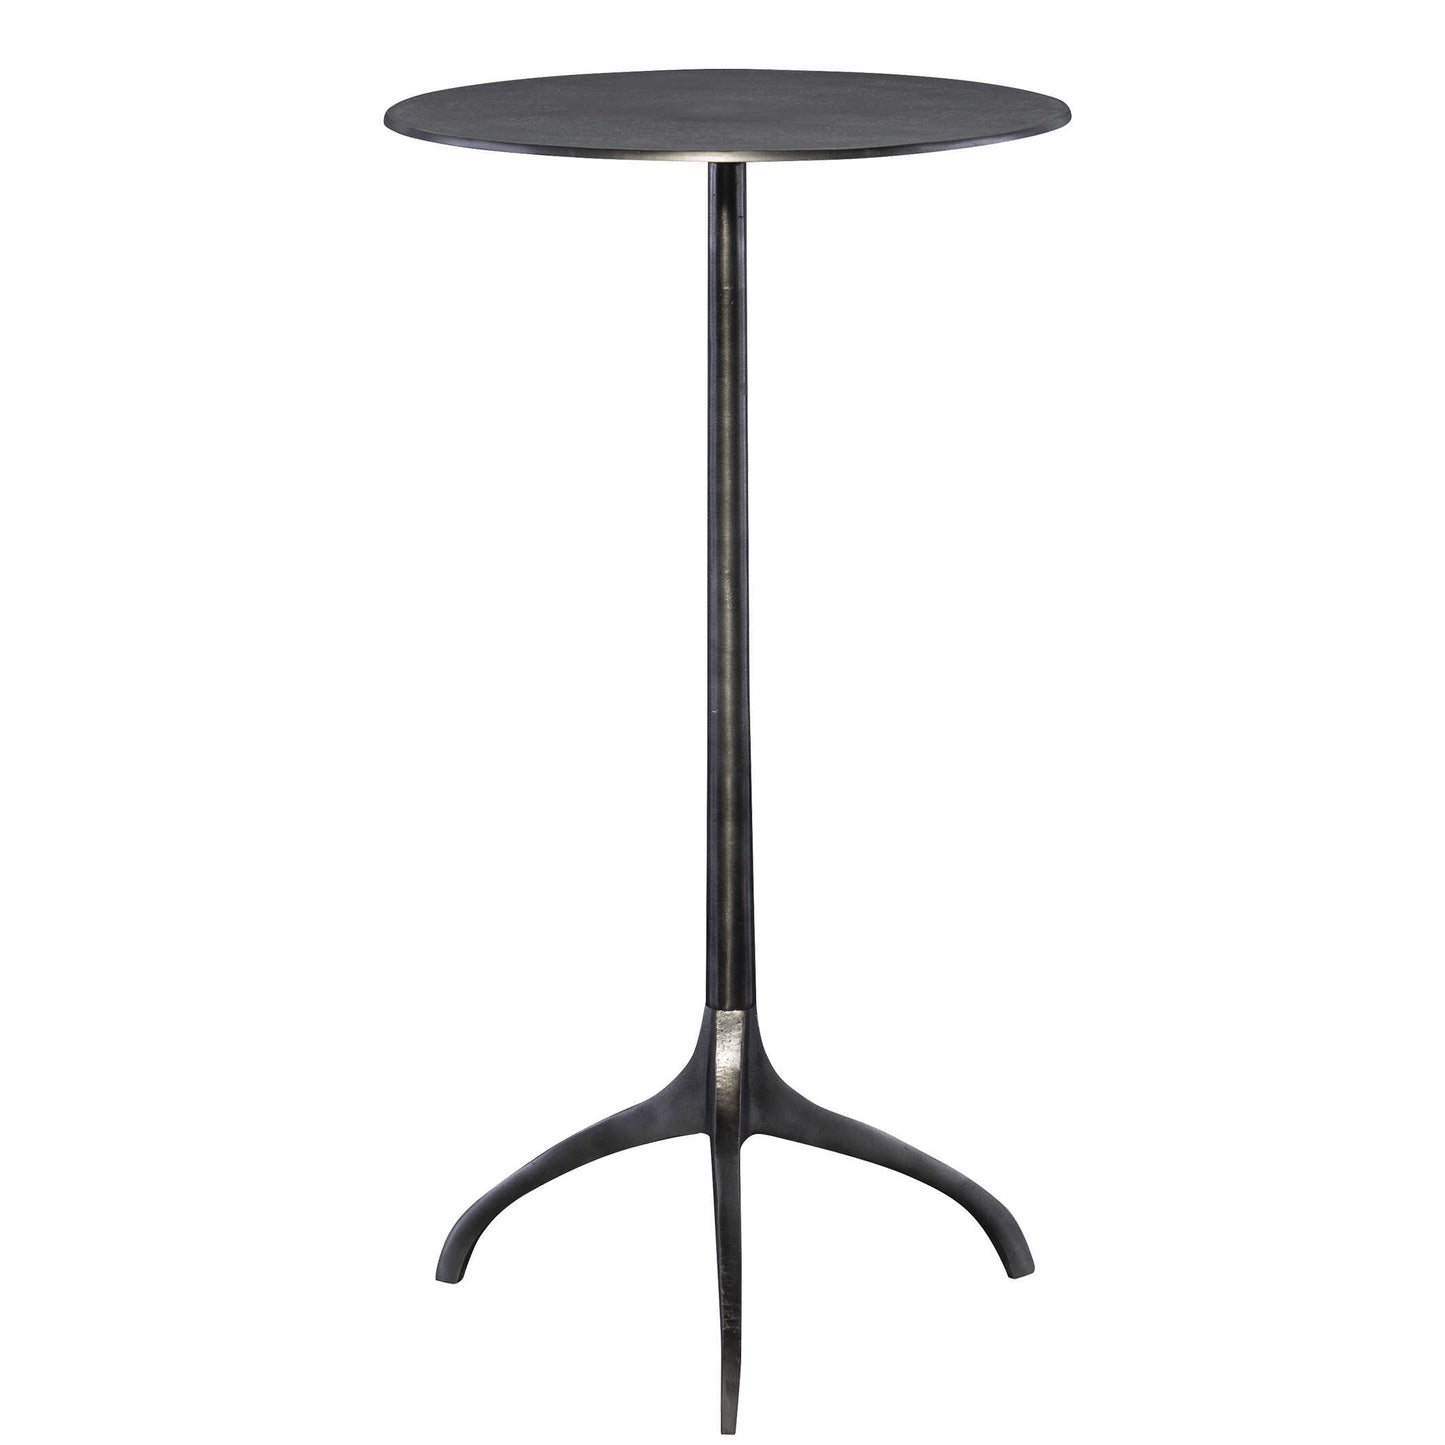 Industrial Nickel End Table with 3 legs and a round top picture from the side.